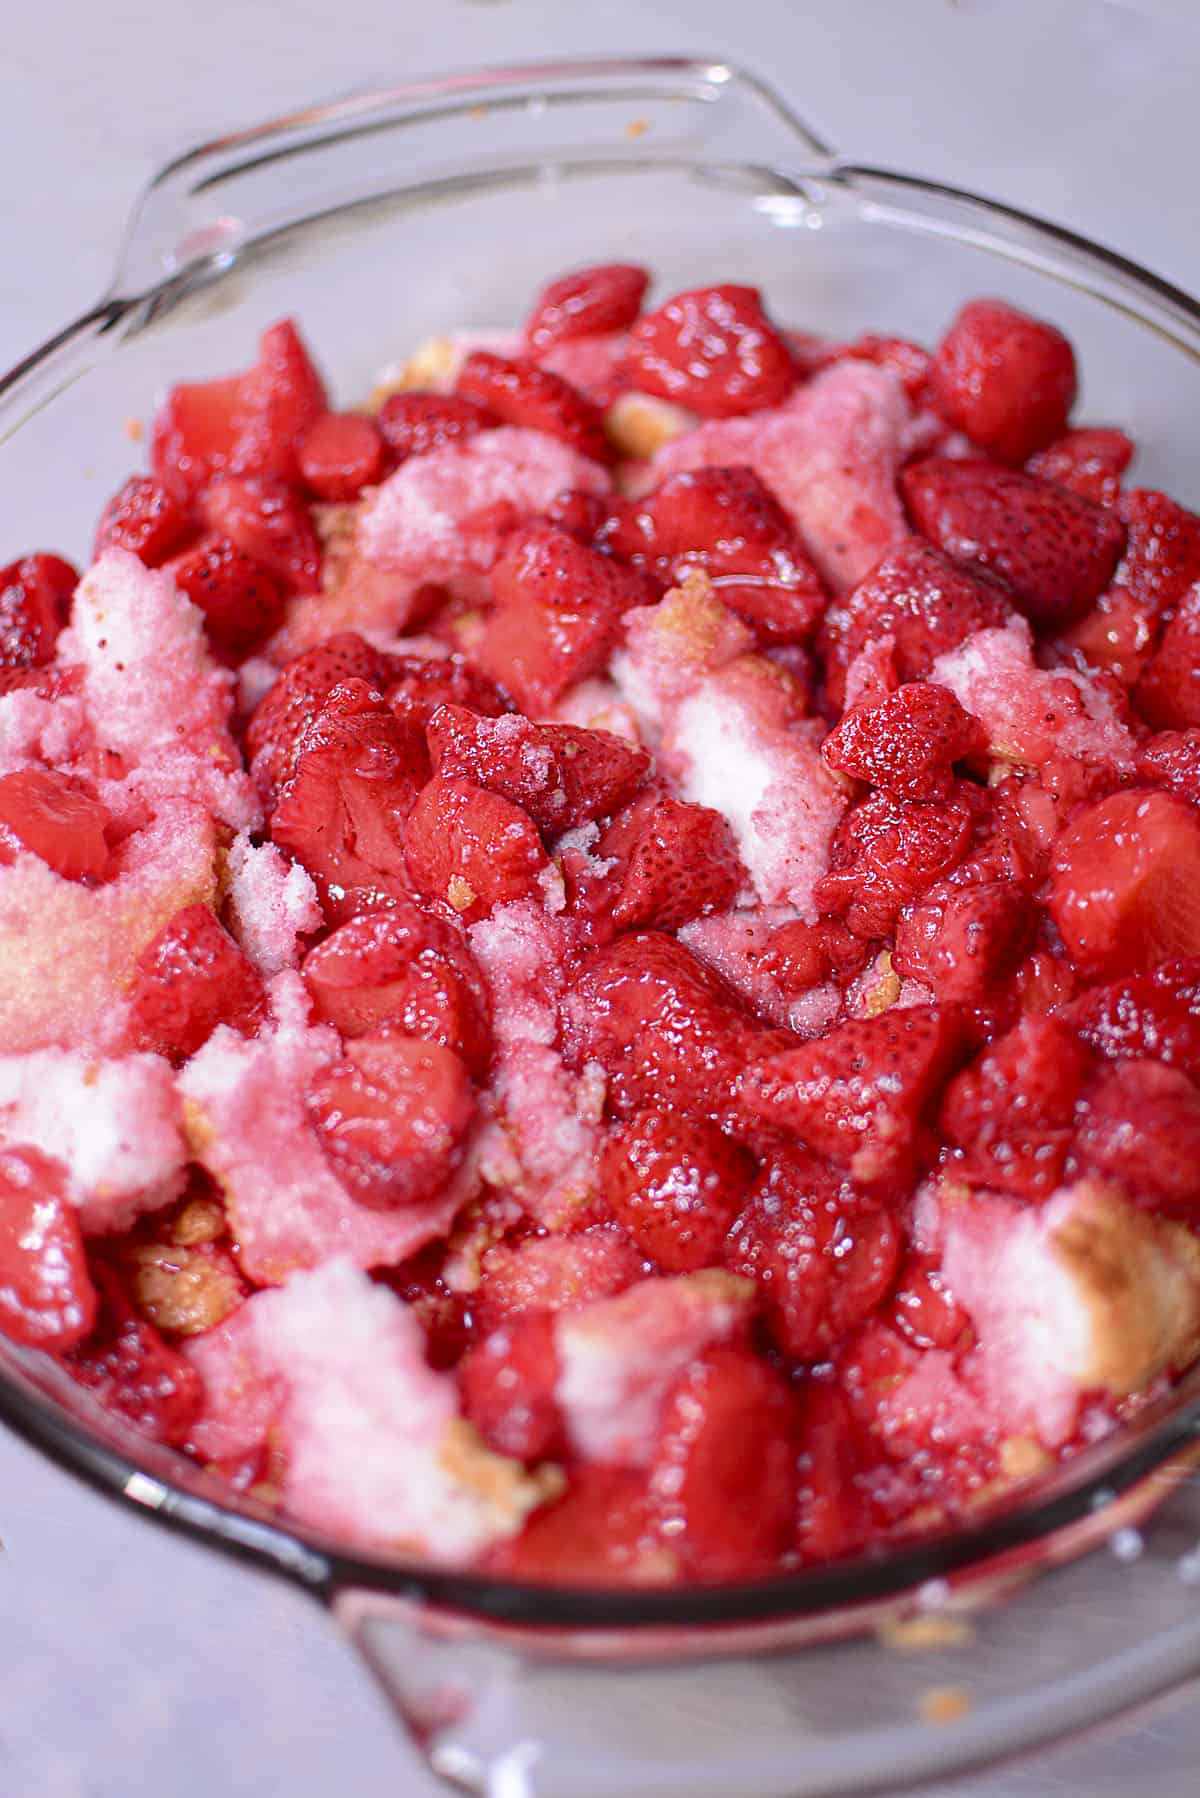 The jello strawberry mixture is poured over the angel food cake in the baking dish.